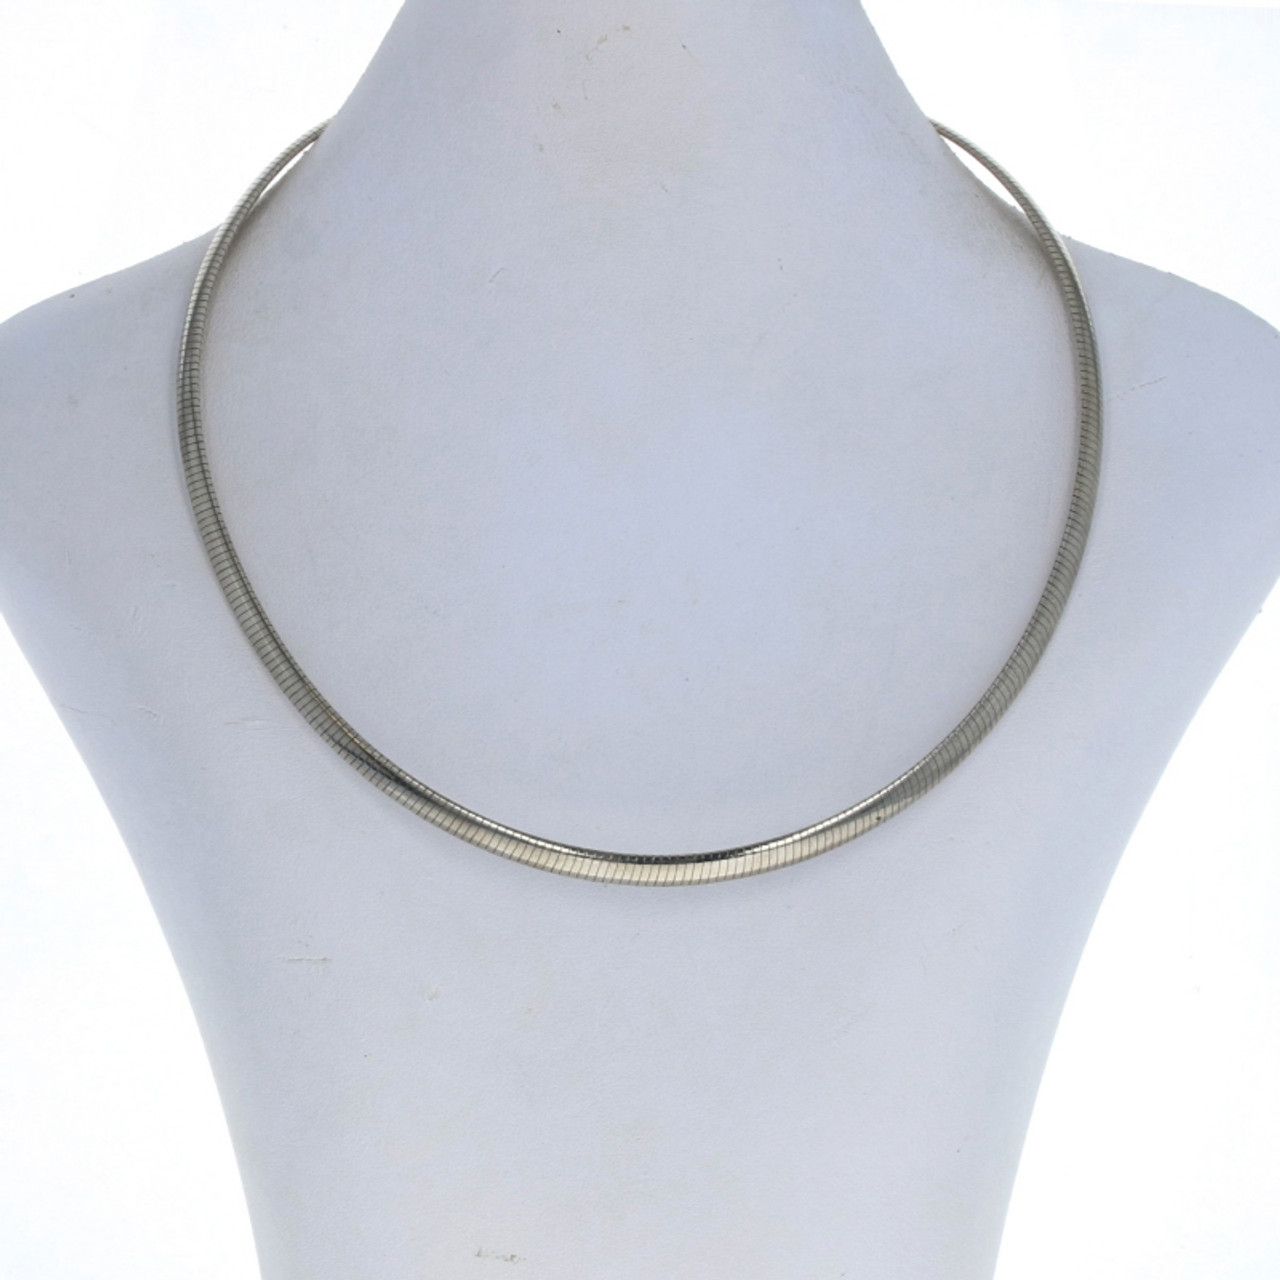 Cape Cod Sterling Silver Omega Necklace with Silver Bead – Susan's Treasures